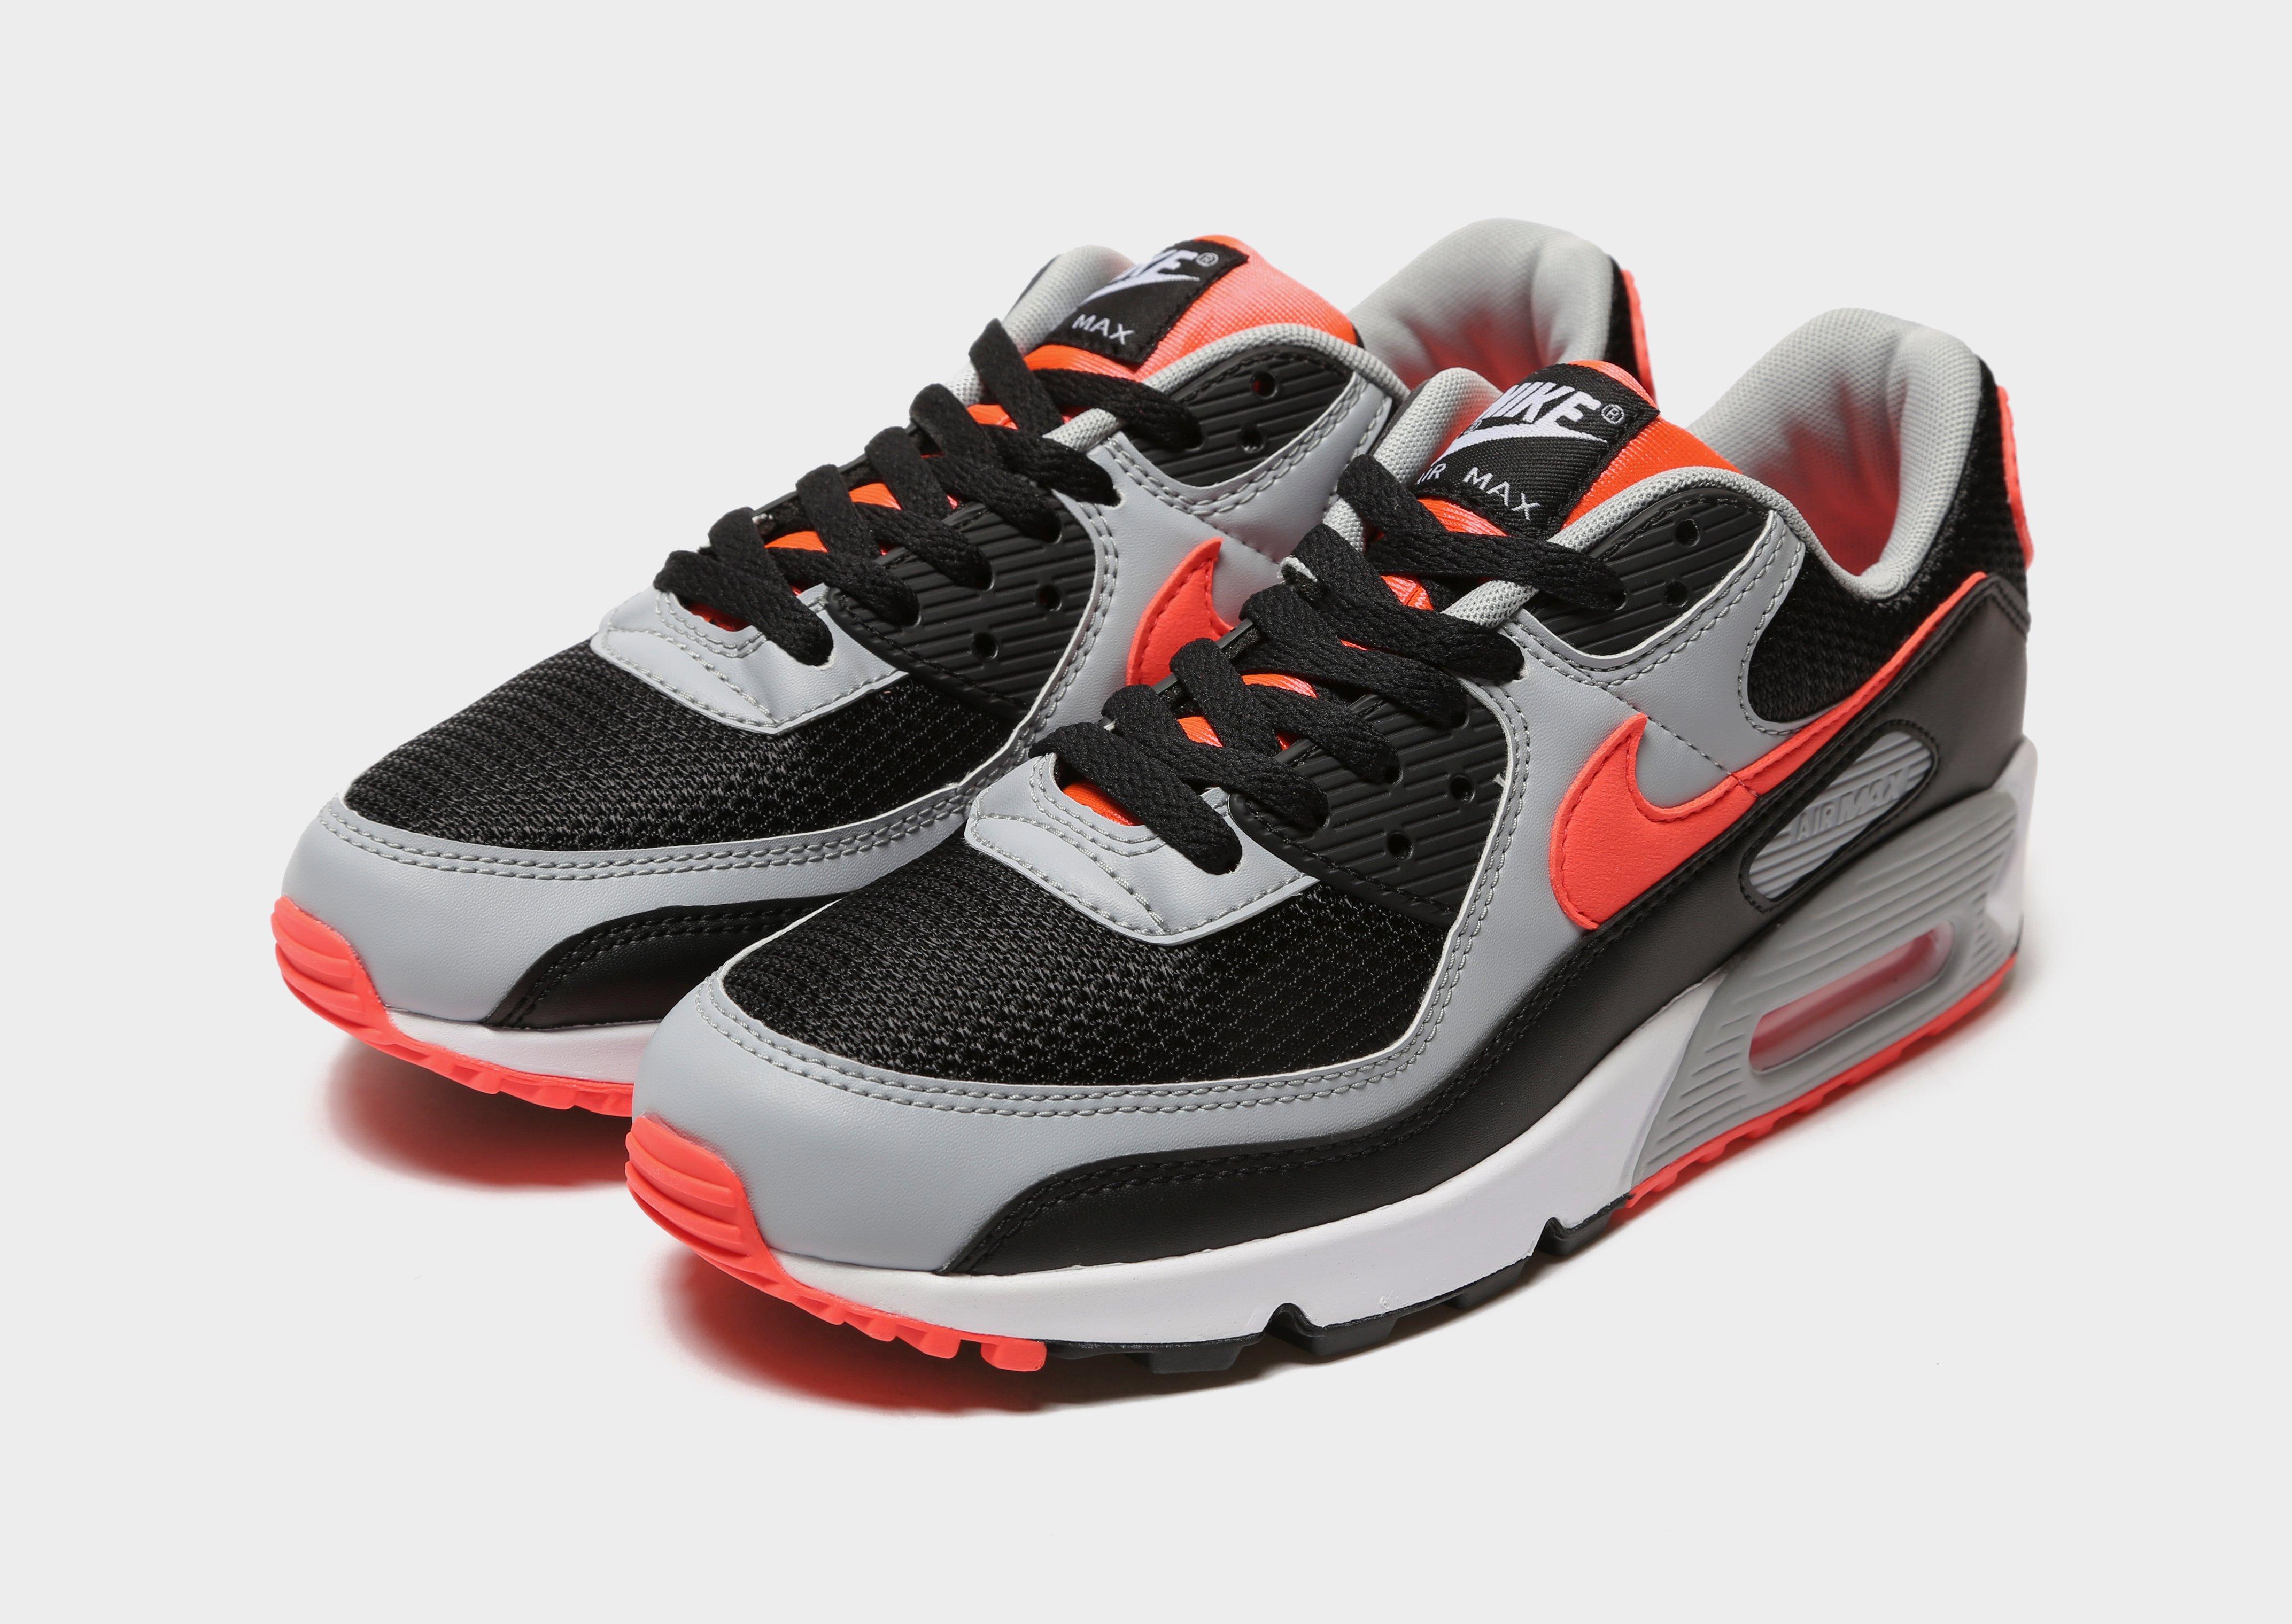 air max 90 red grey white